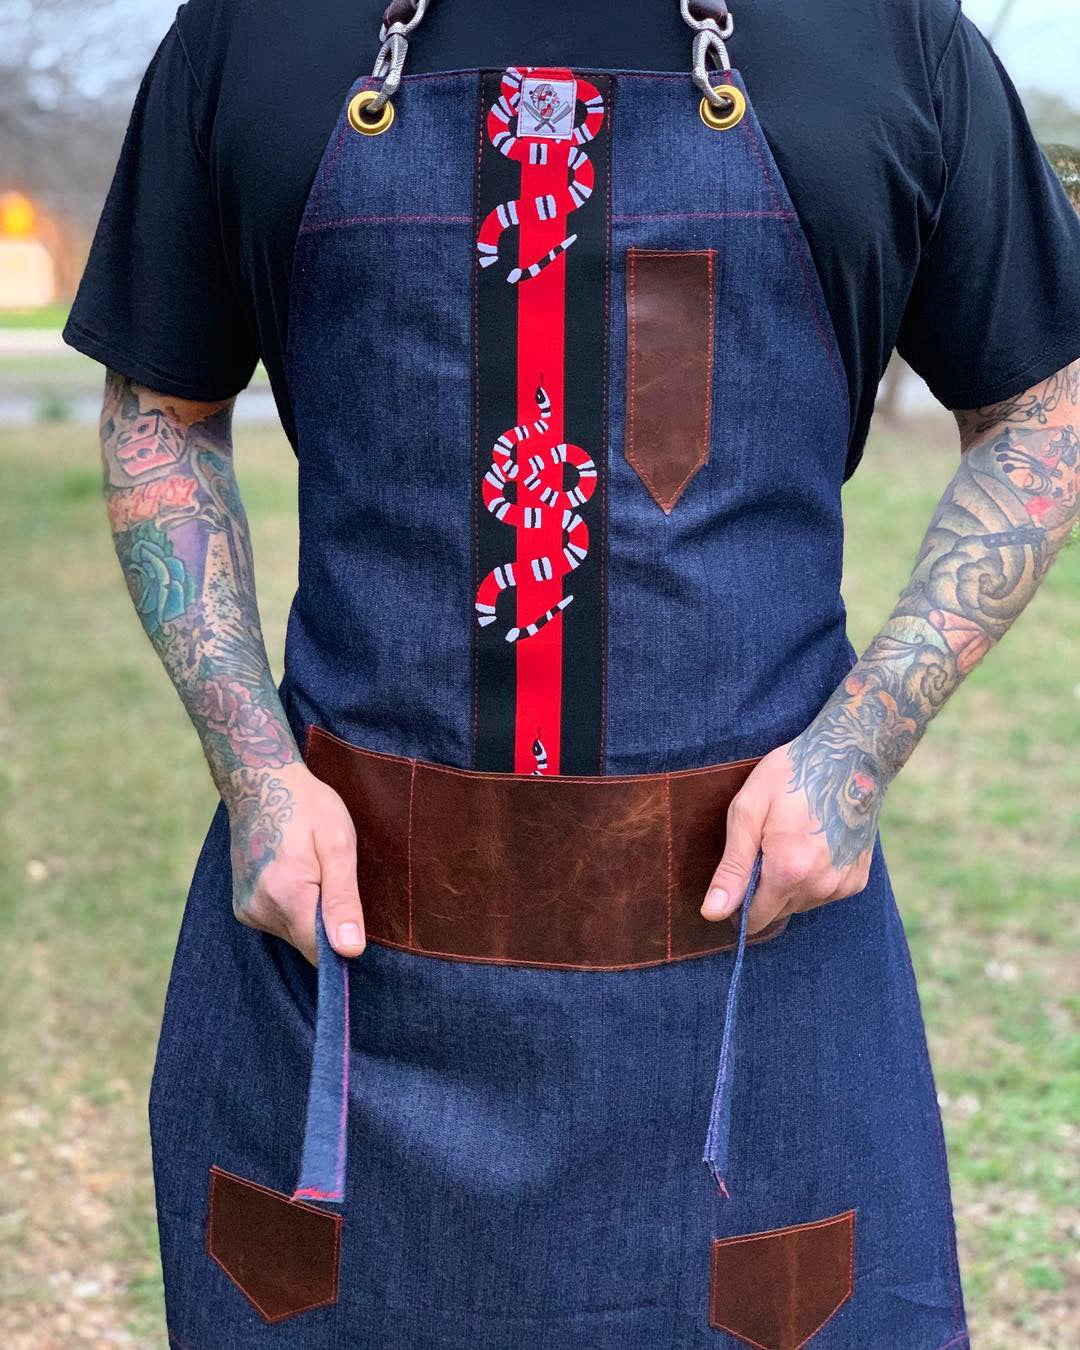 “Summer in Texas” apron or “Coral Snake” apron